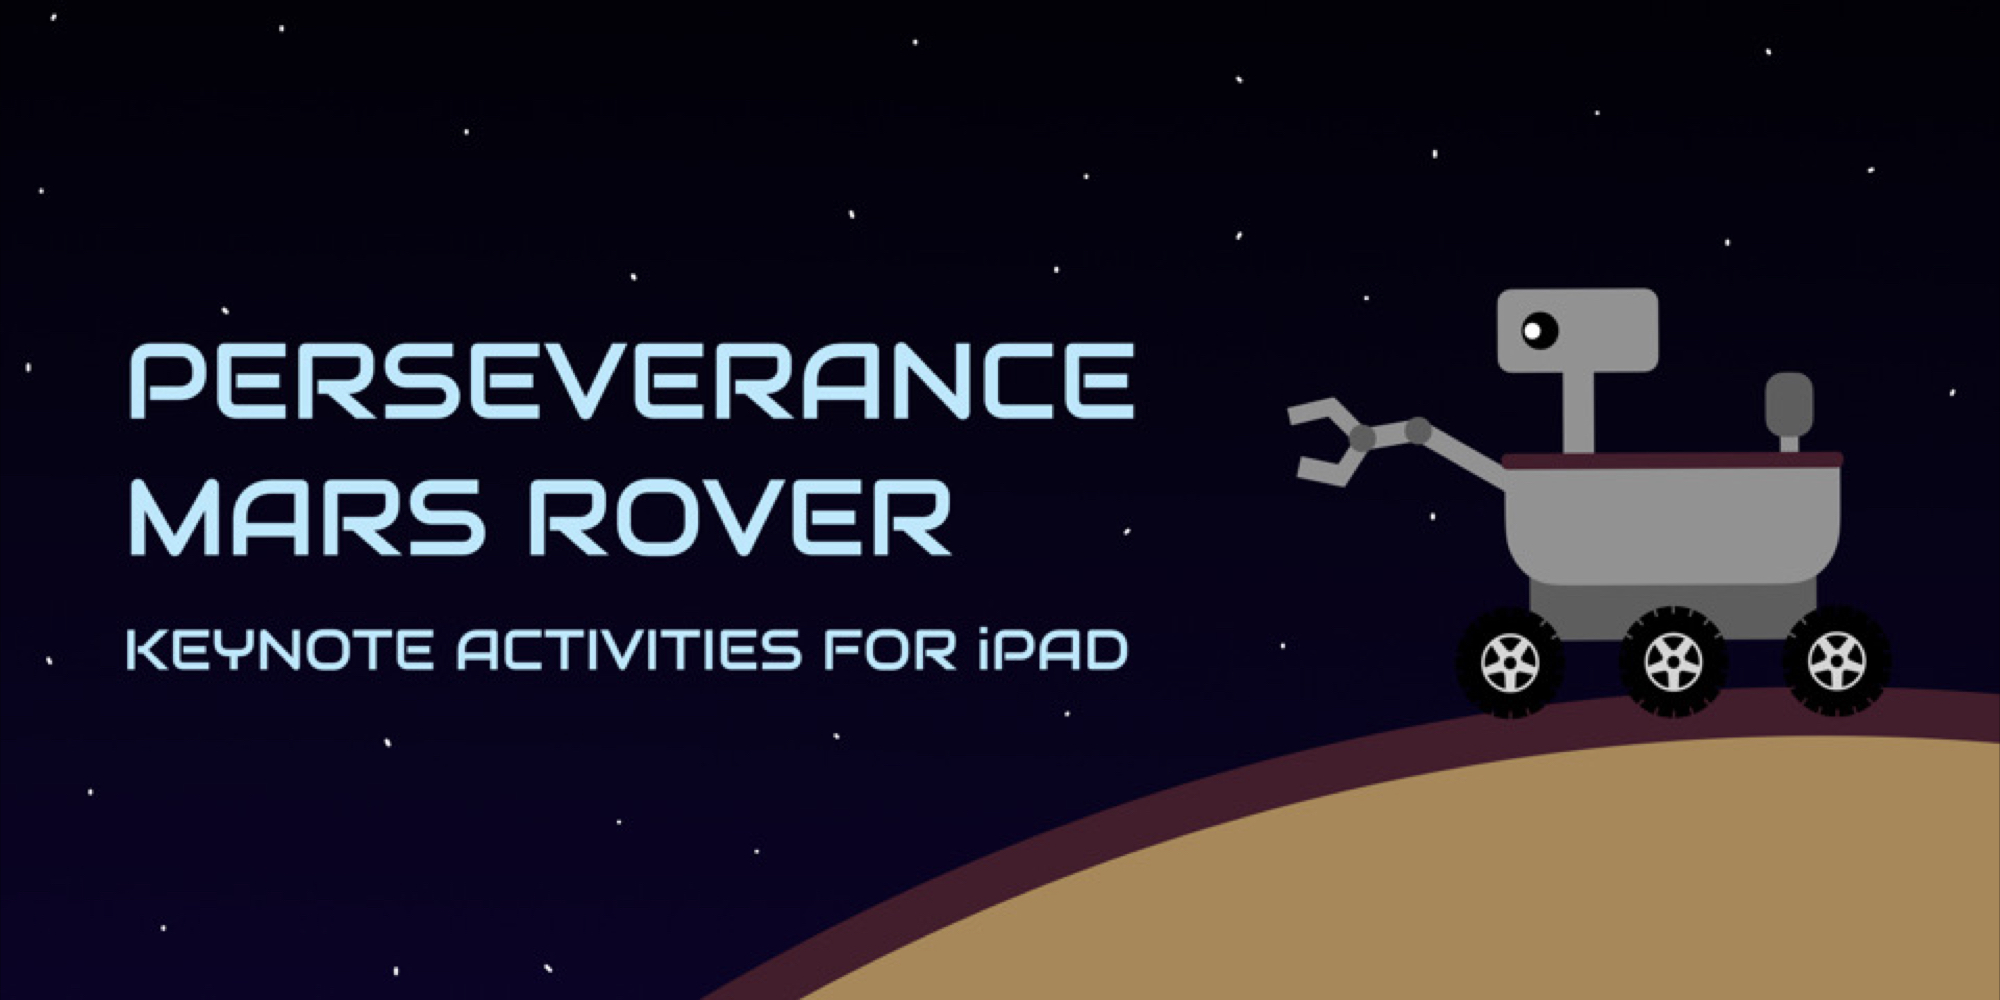 Cartoon-like Mars Rover on Mars against a space background with text “Perseverance Mars Rover - Keynote Activities for iPad’.